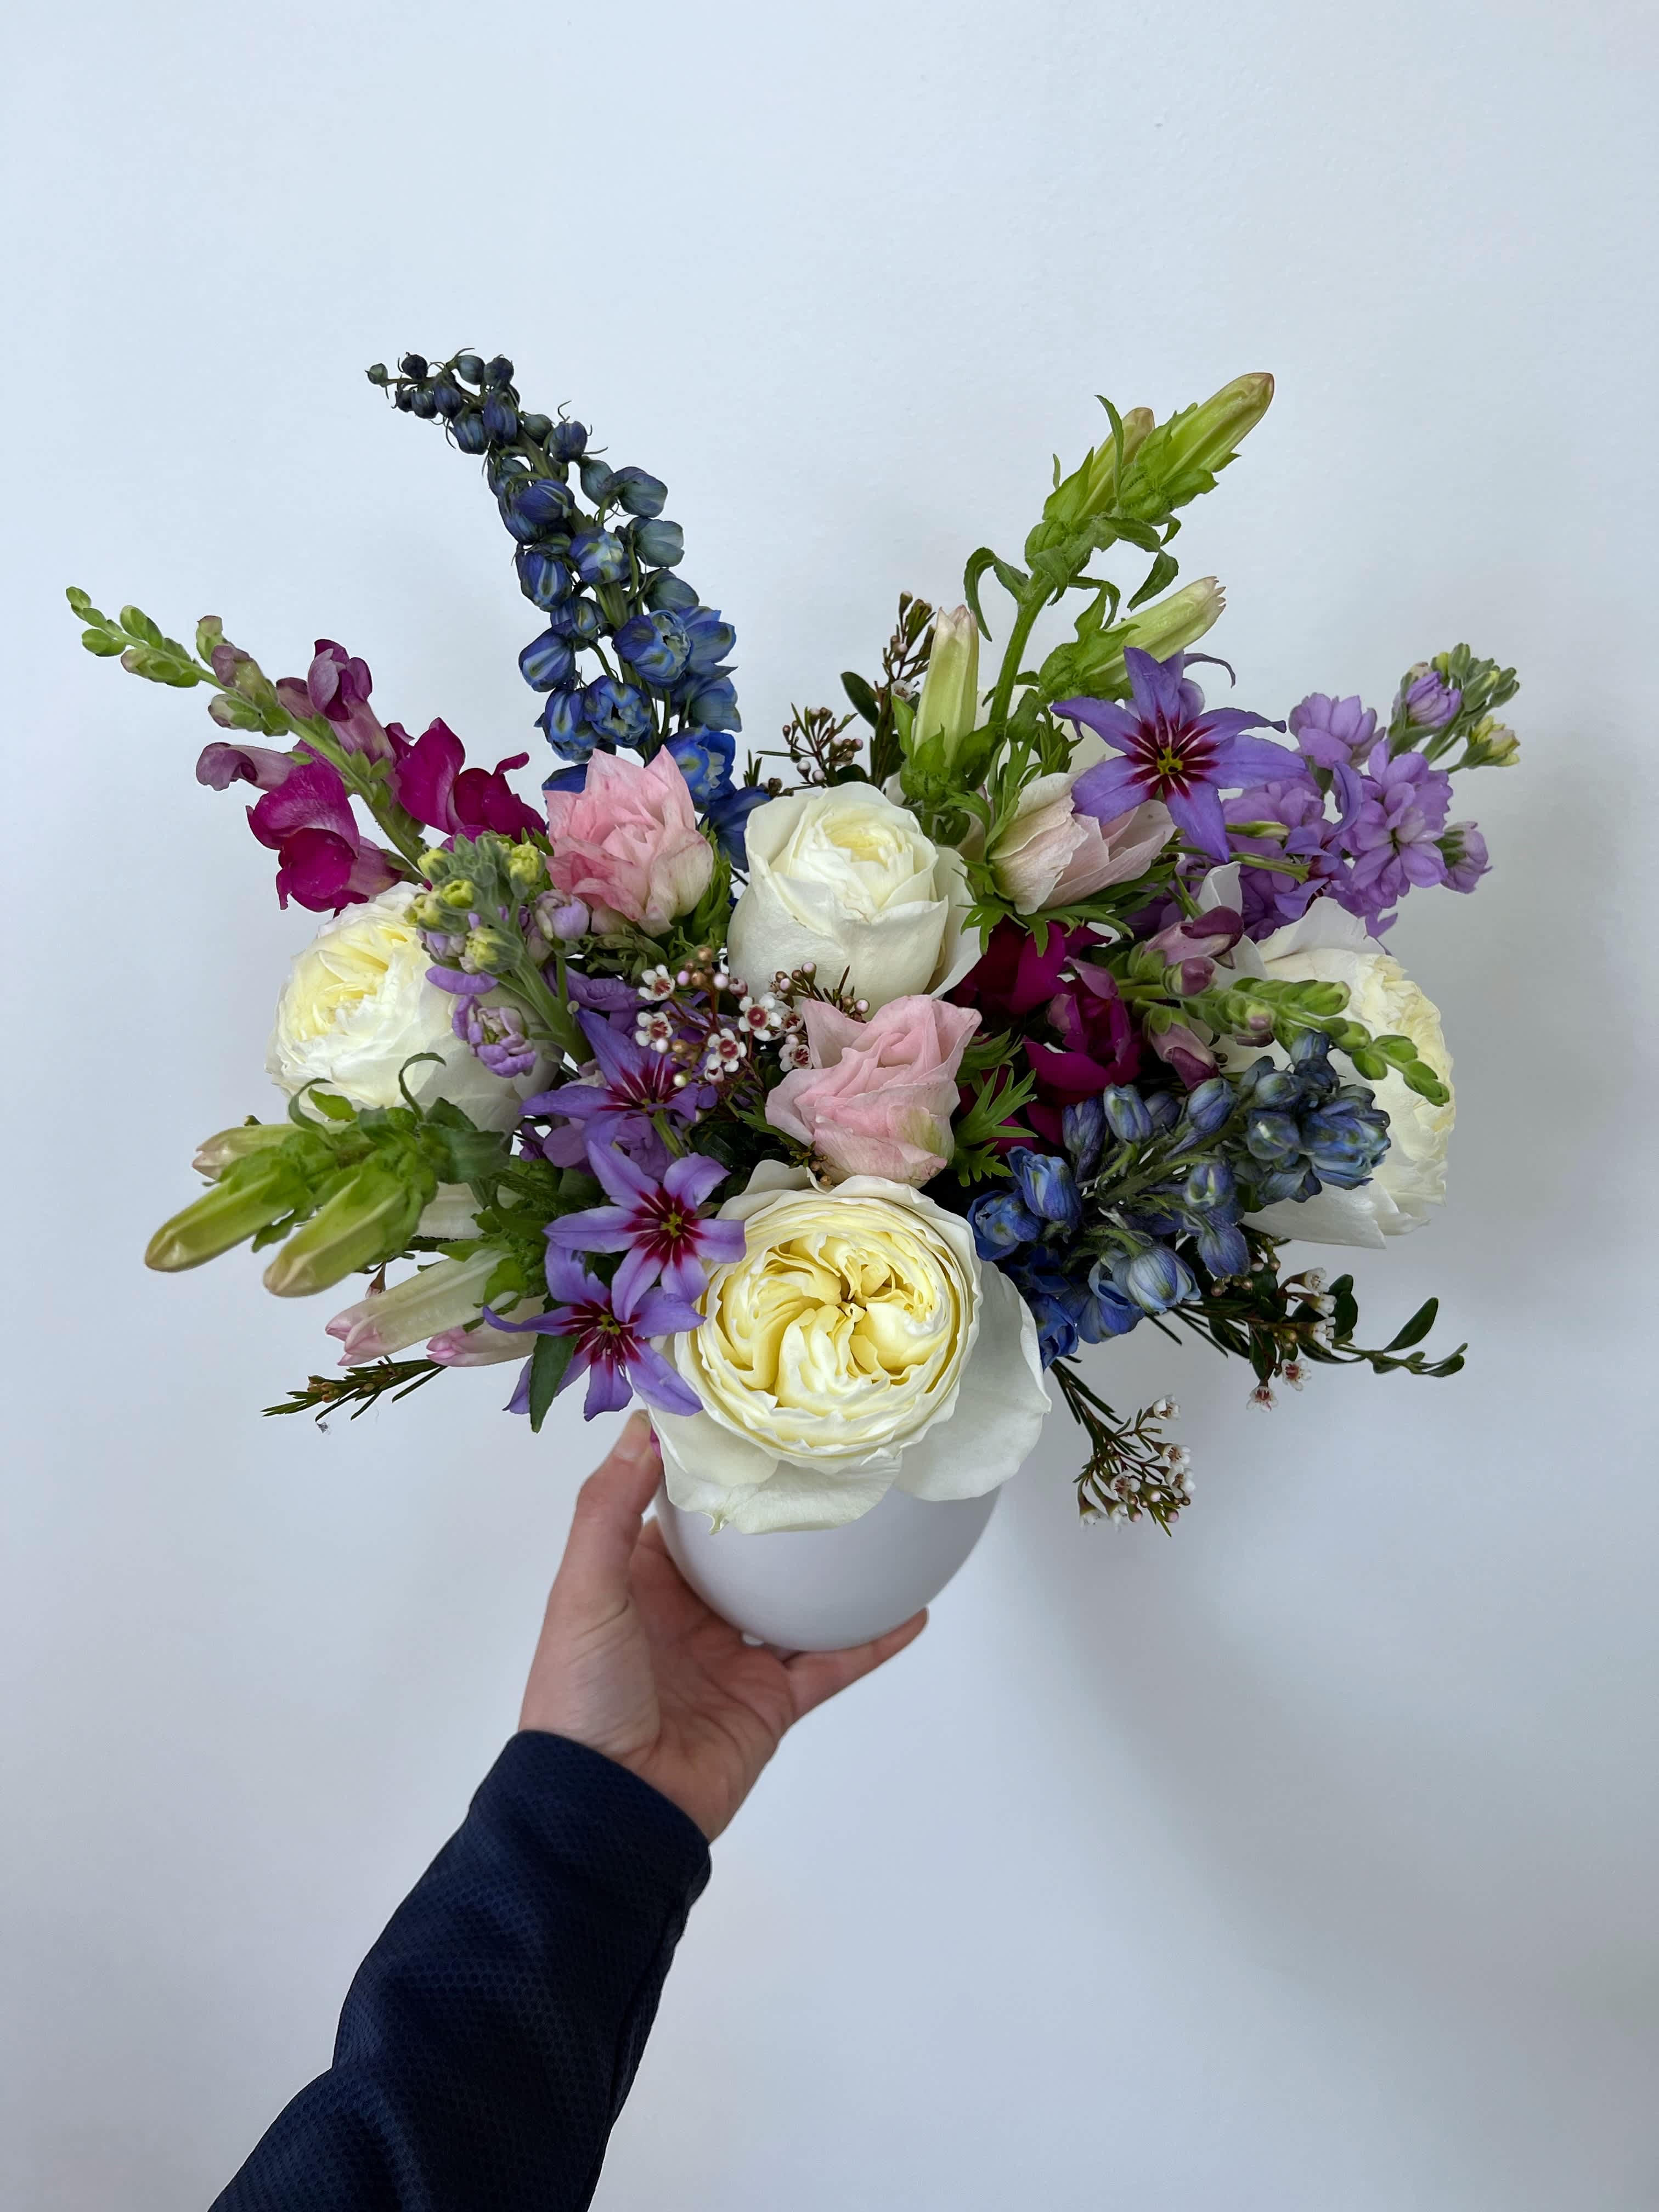 The Kimberly - Meet “the Kimberly”, a feminine variety of cream, pink, purple  and splash of blue florals. Arranged neatly in a white ceramic pot.